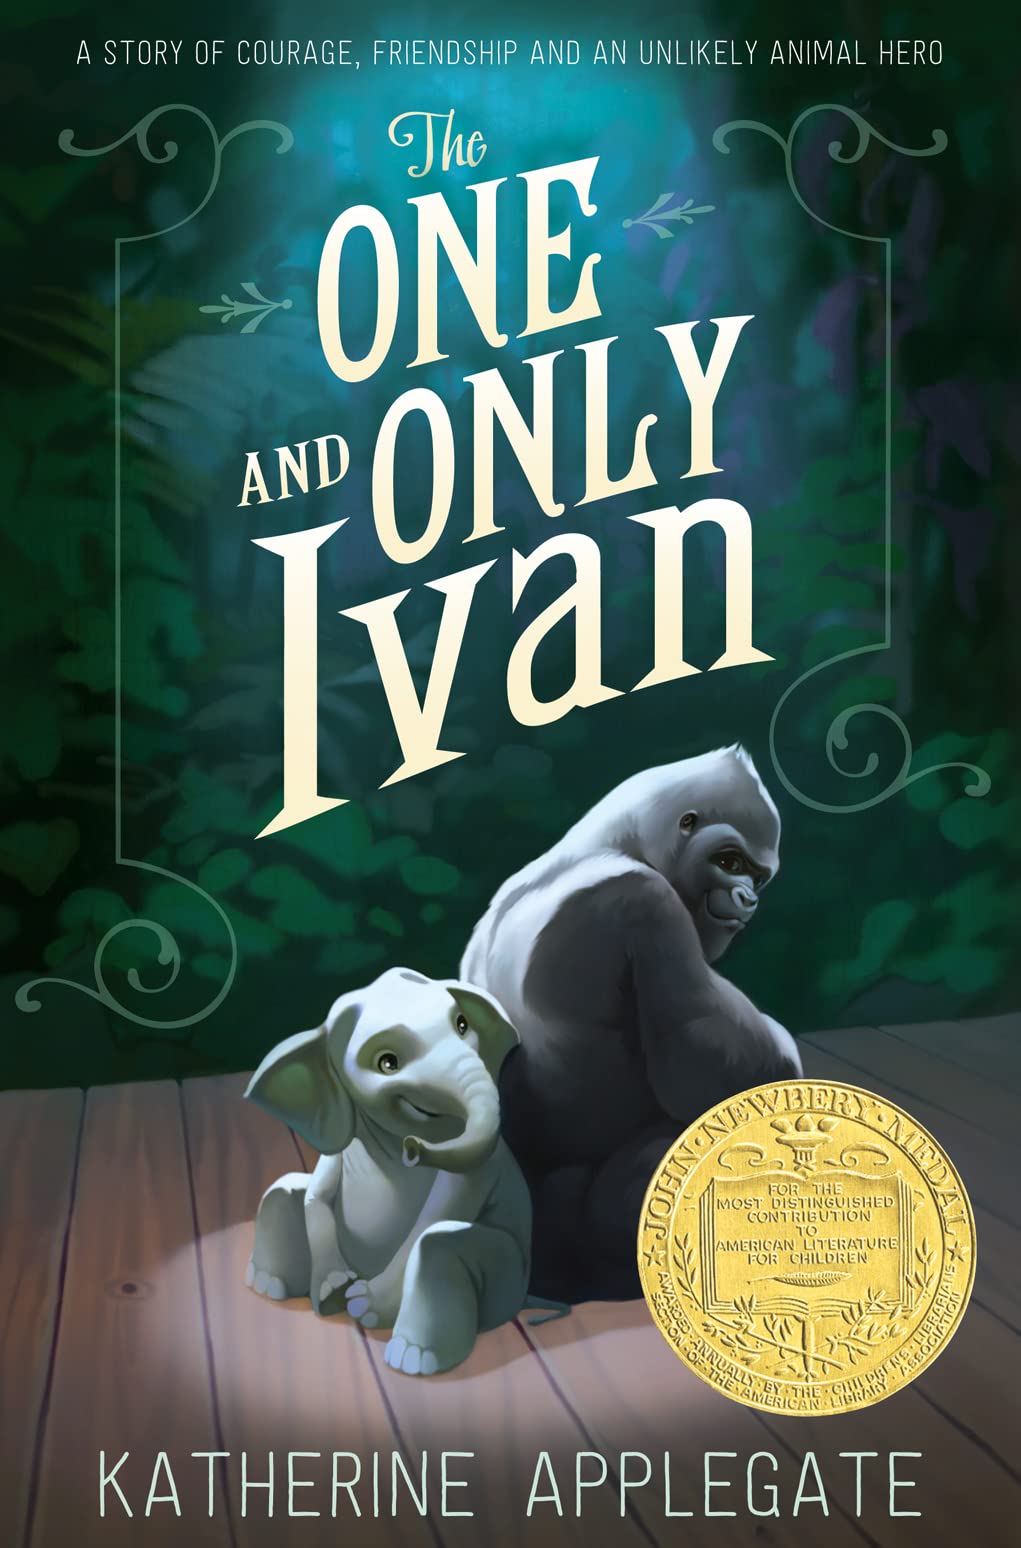 Image for "The One and Only Ivan" book cover